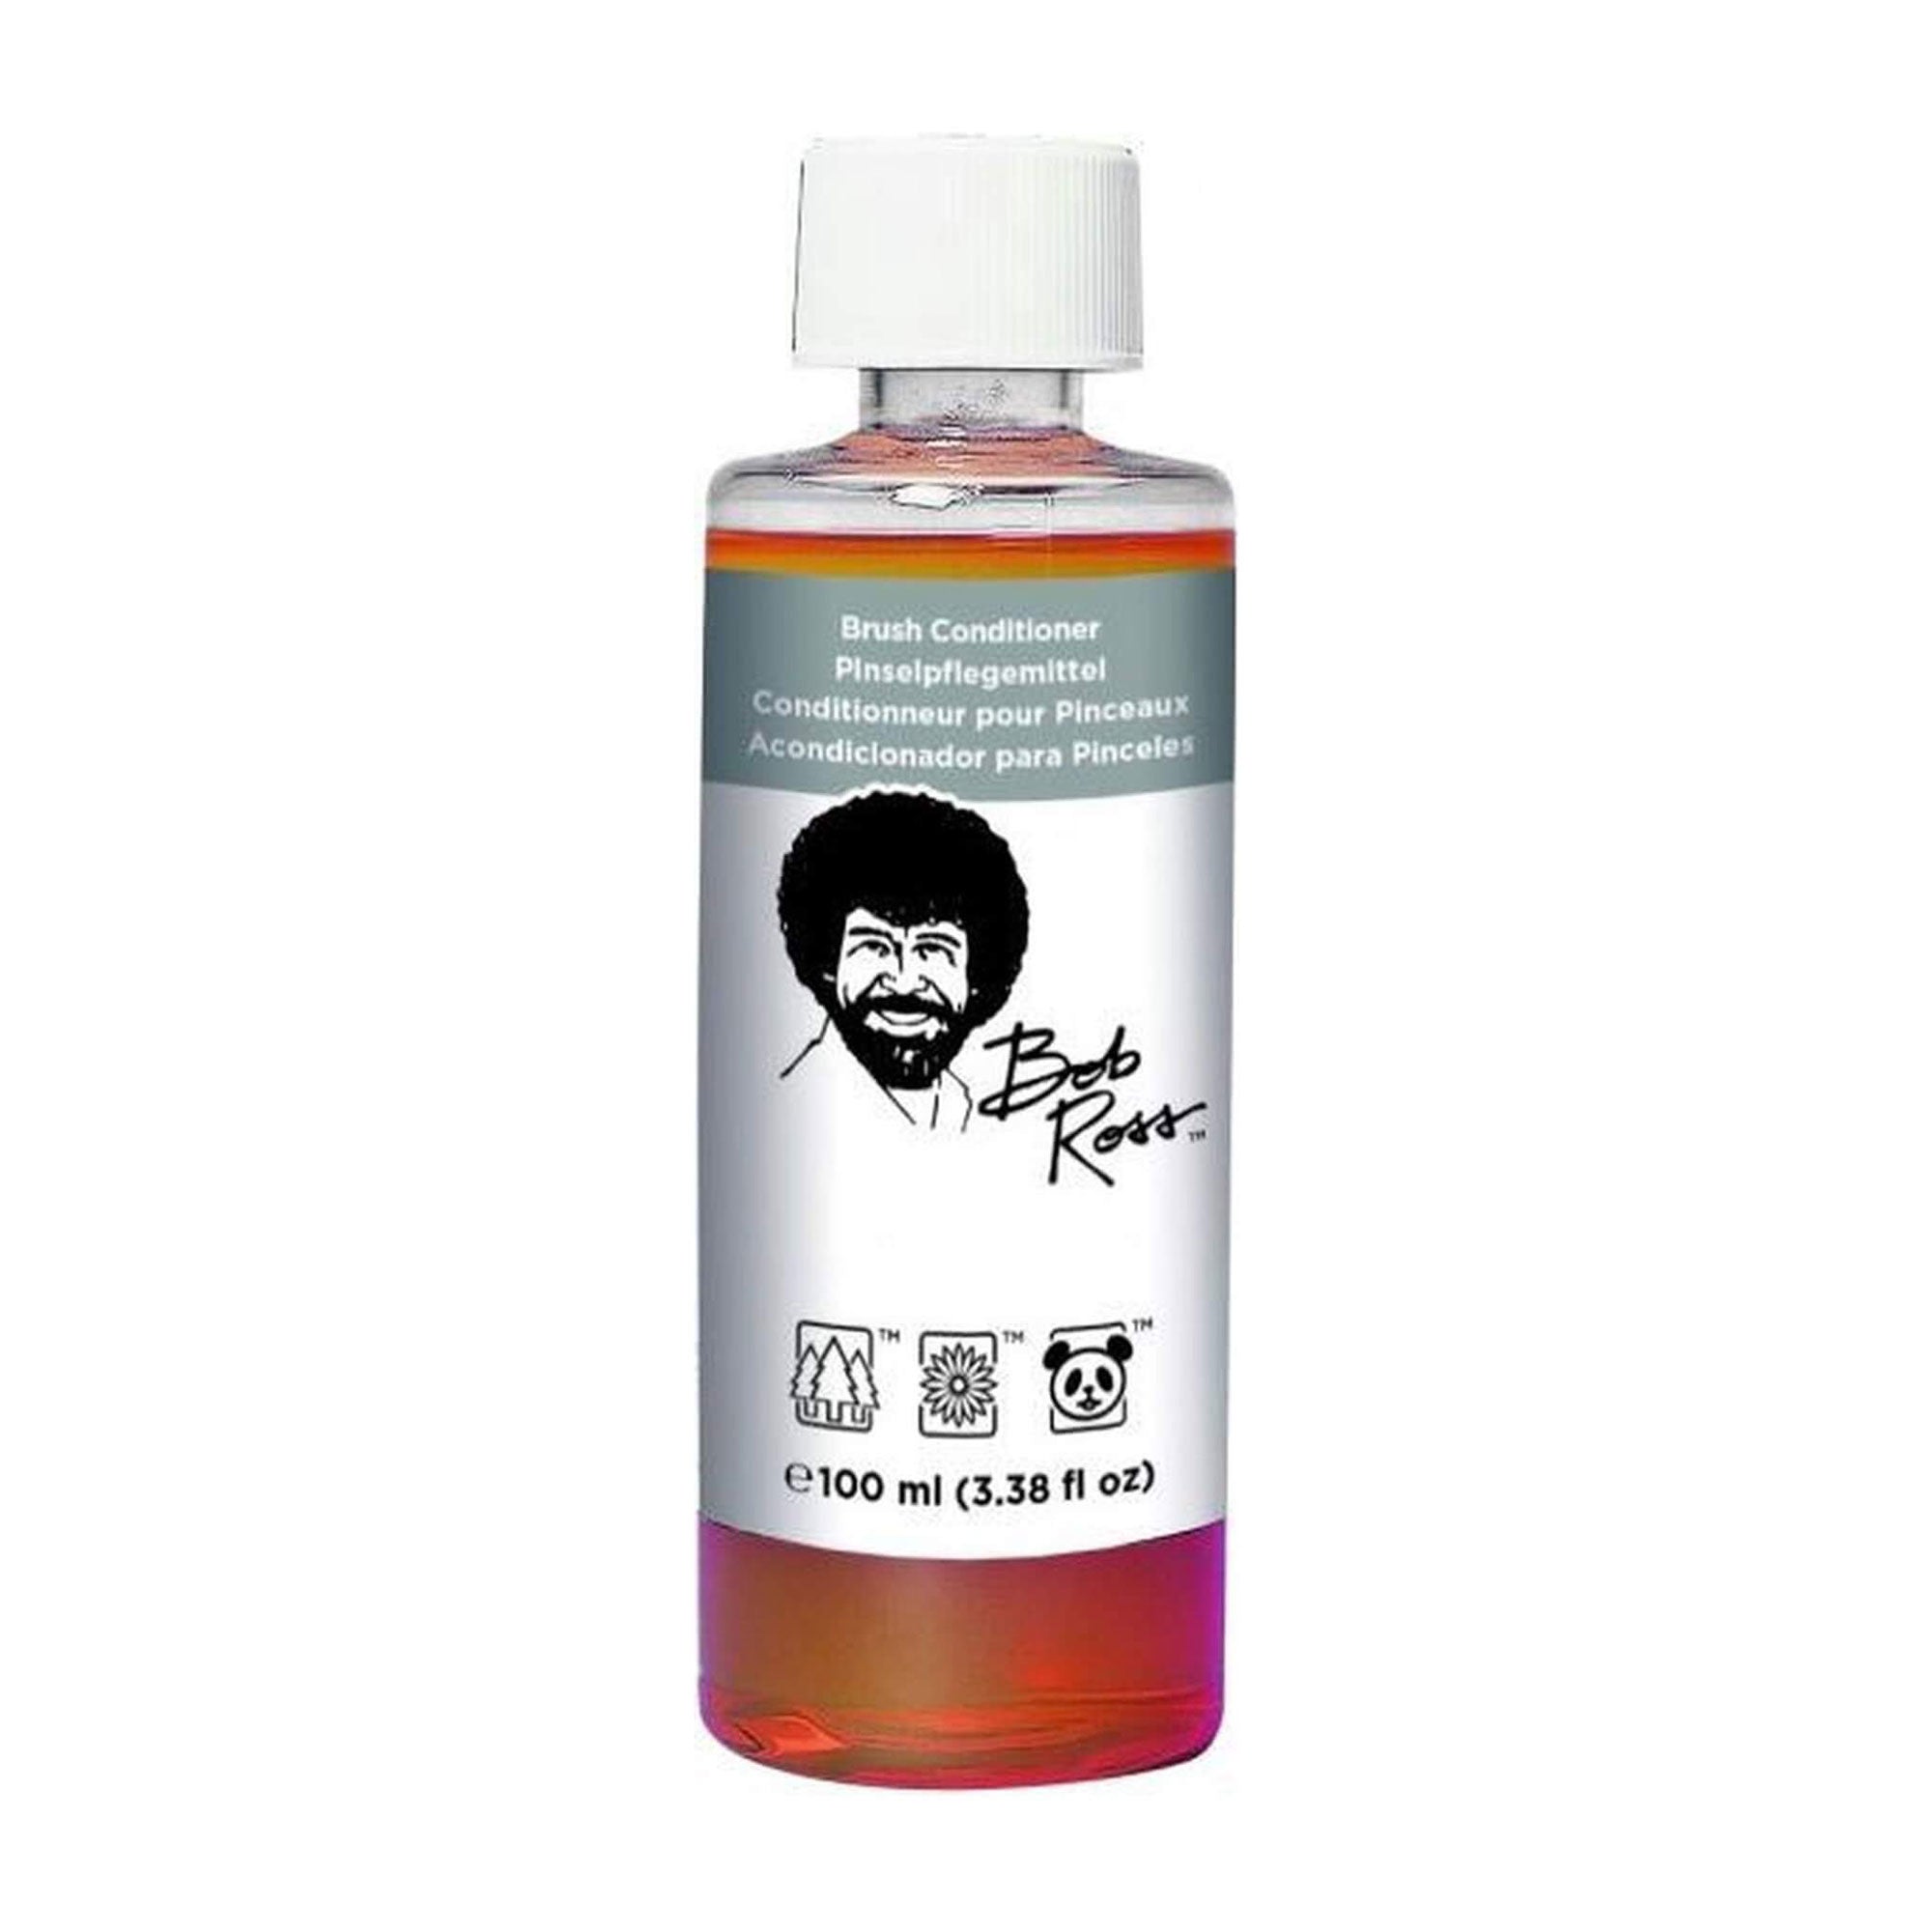 Bob Ross Brush Cleaner and Conditioner - 100ml